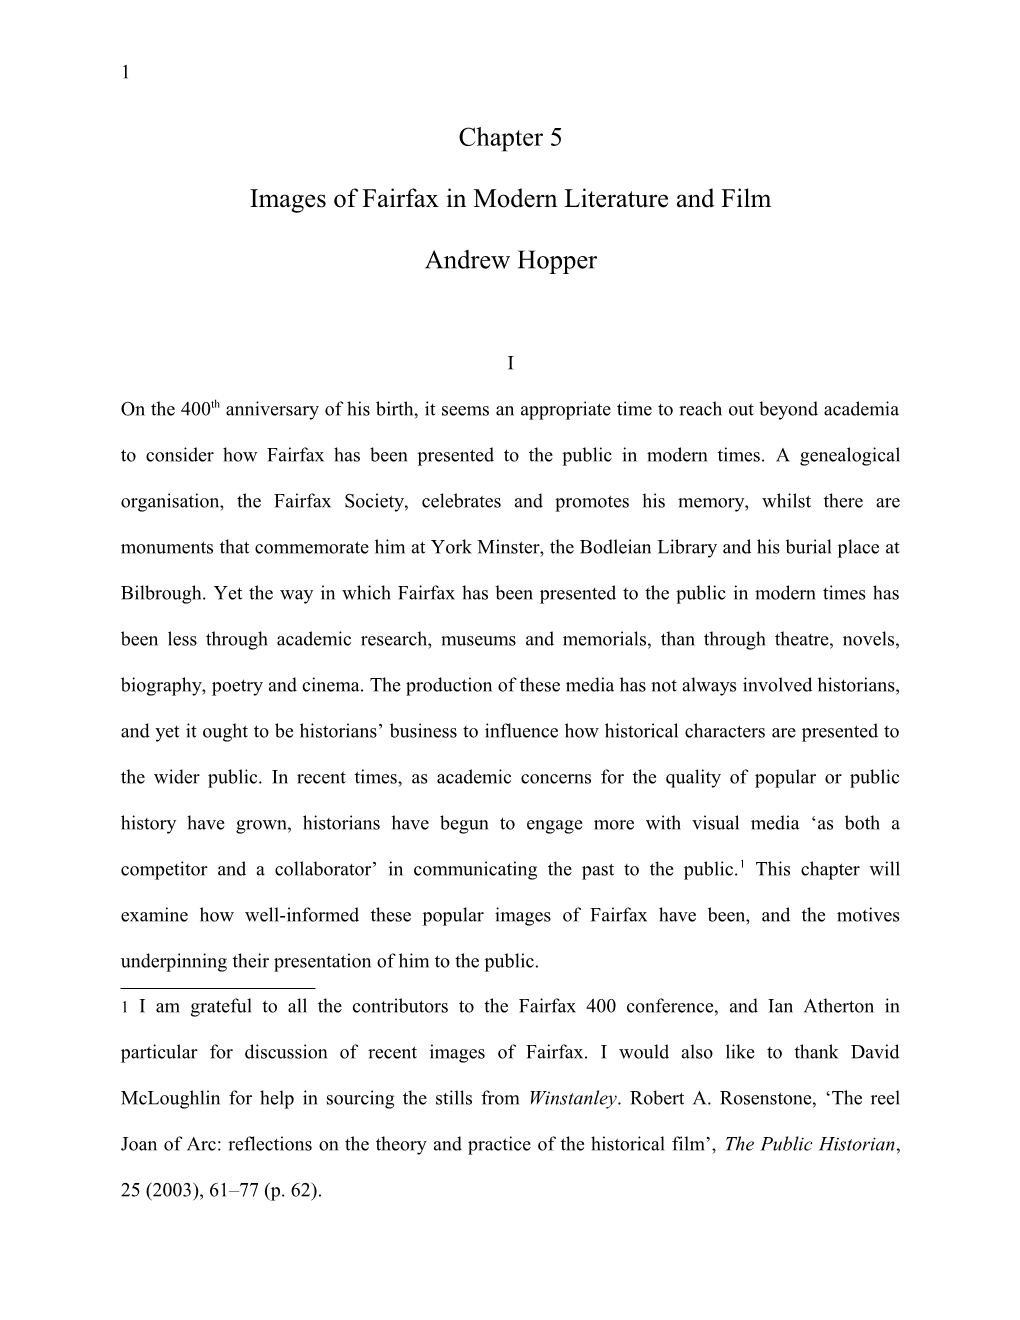 Images of Fairfax in Modern Literature and Film